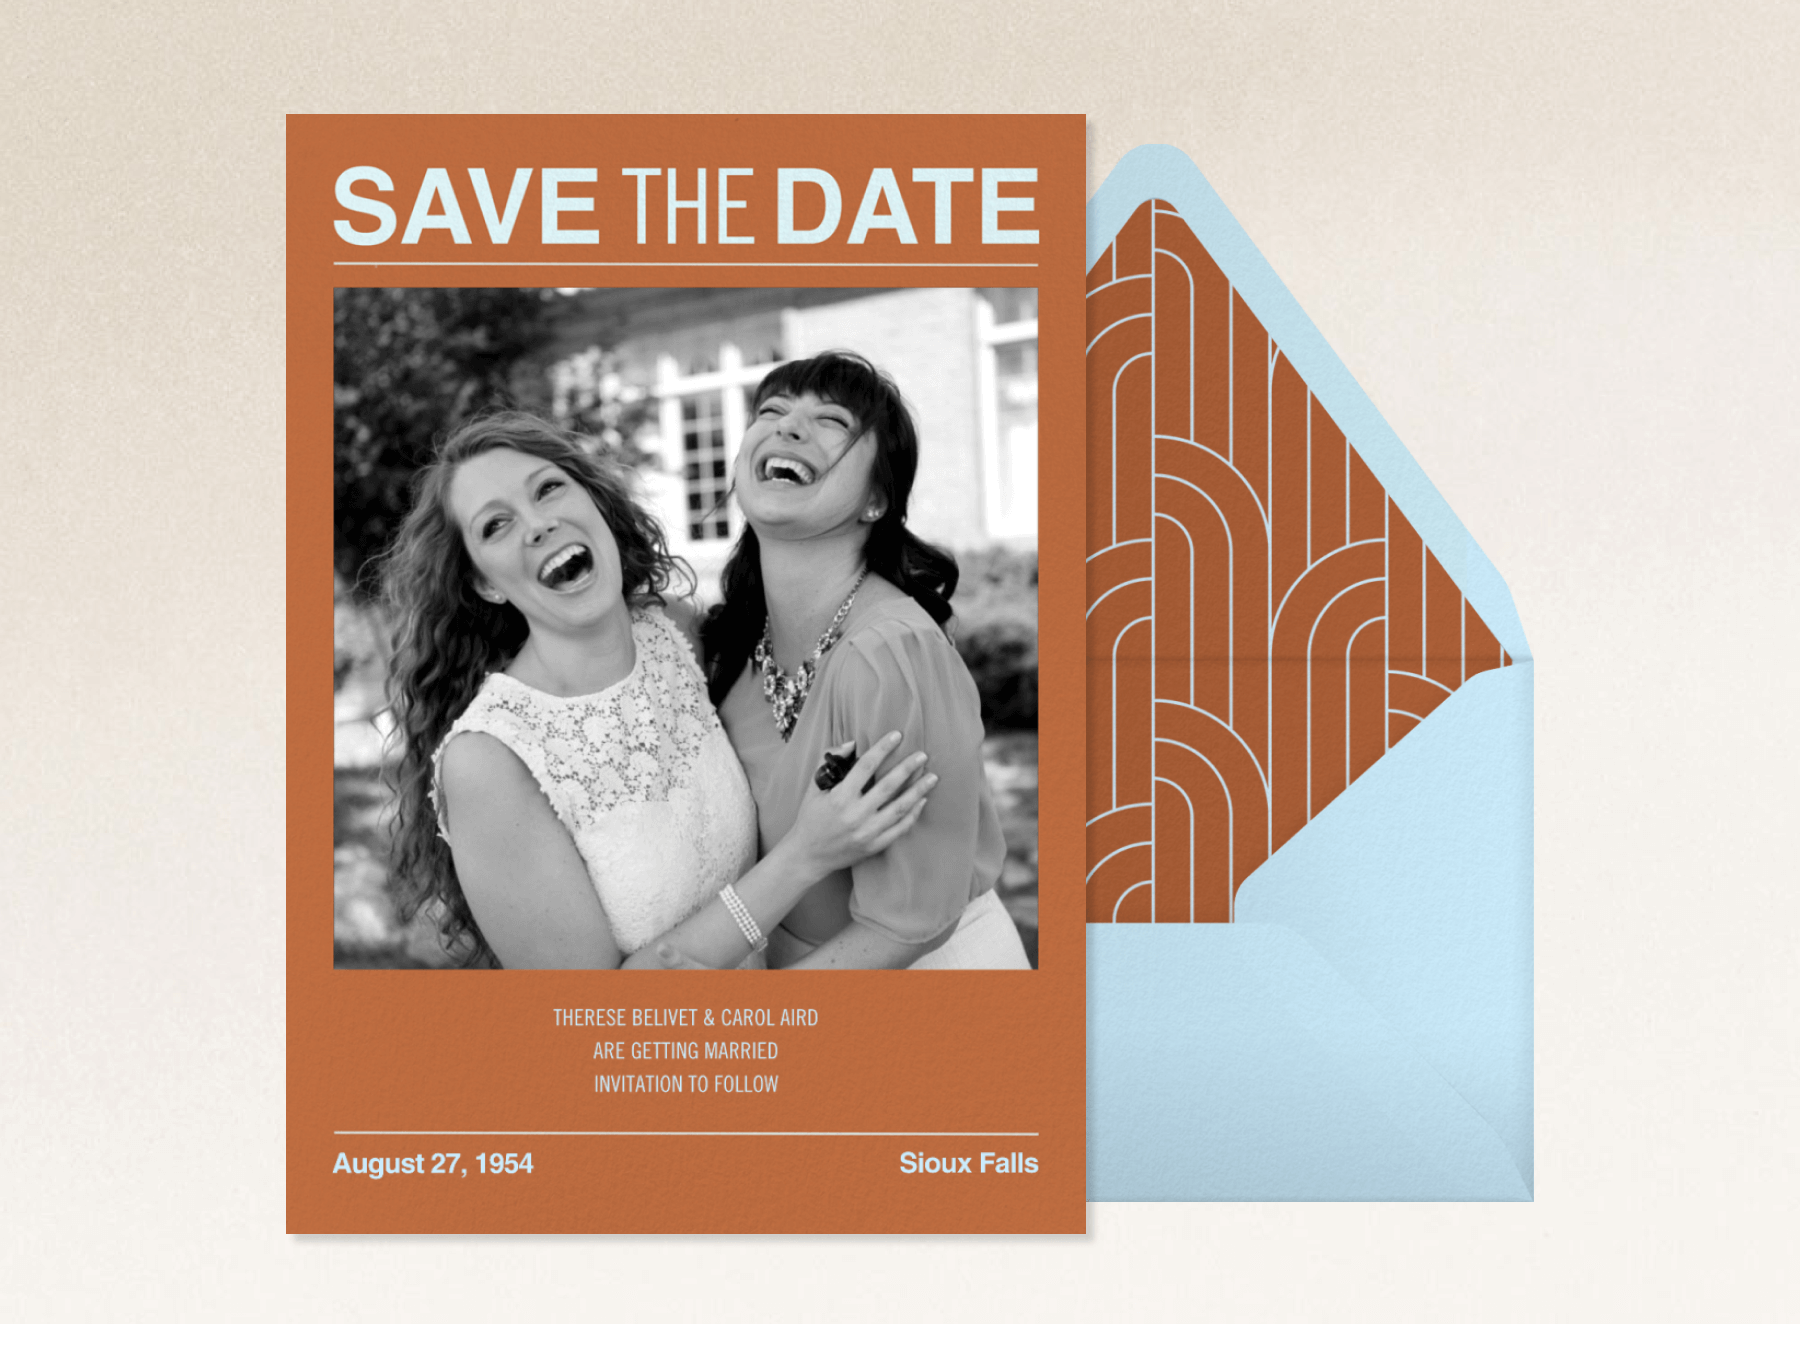 Save the Date Card Wording  A guide to what to include on your